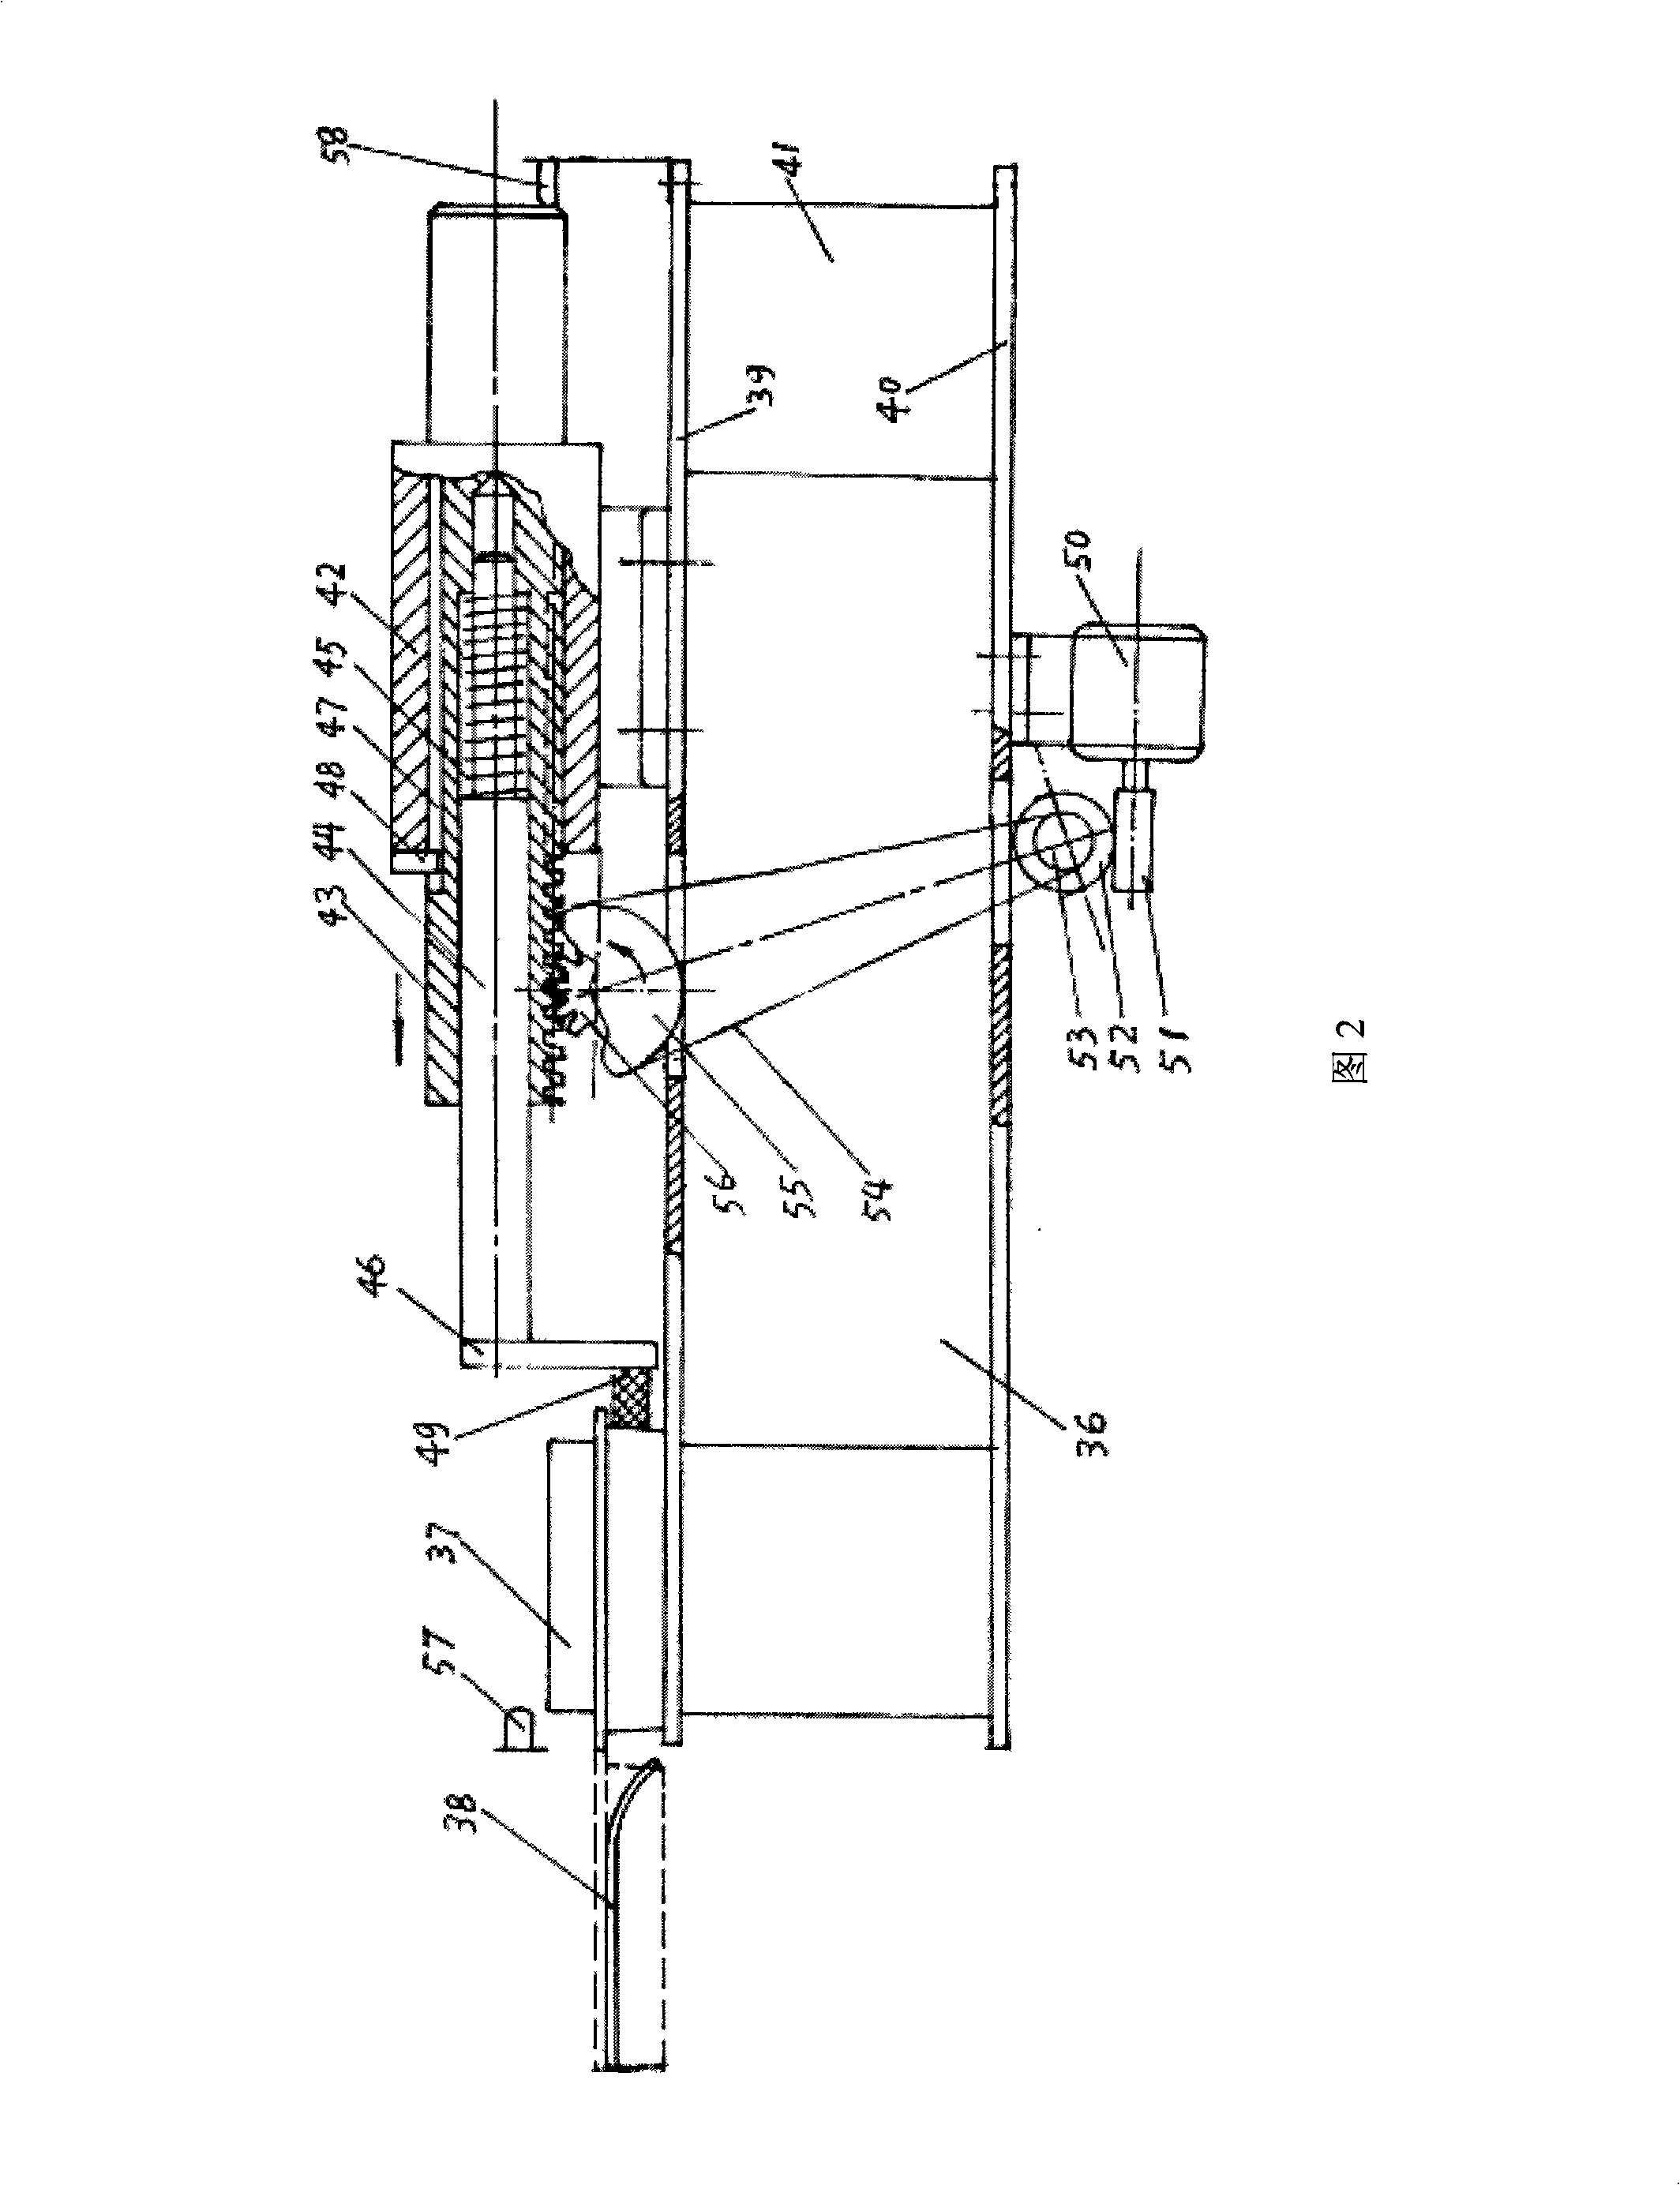 Movable growth disk installation device for aerosol stereo planting production